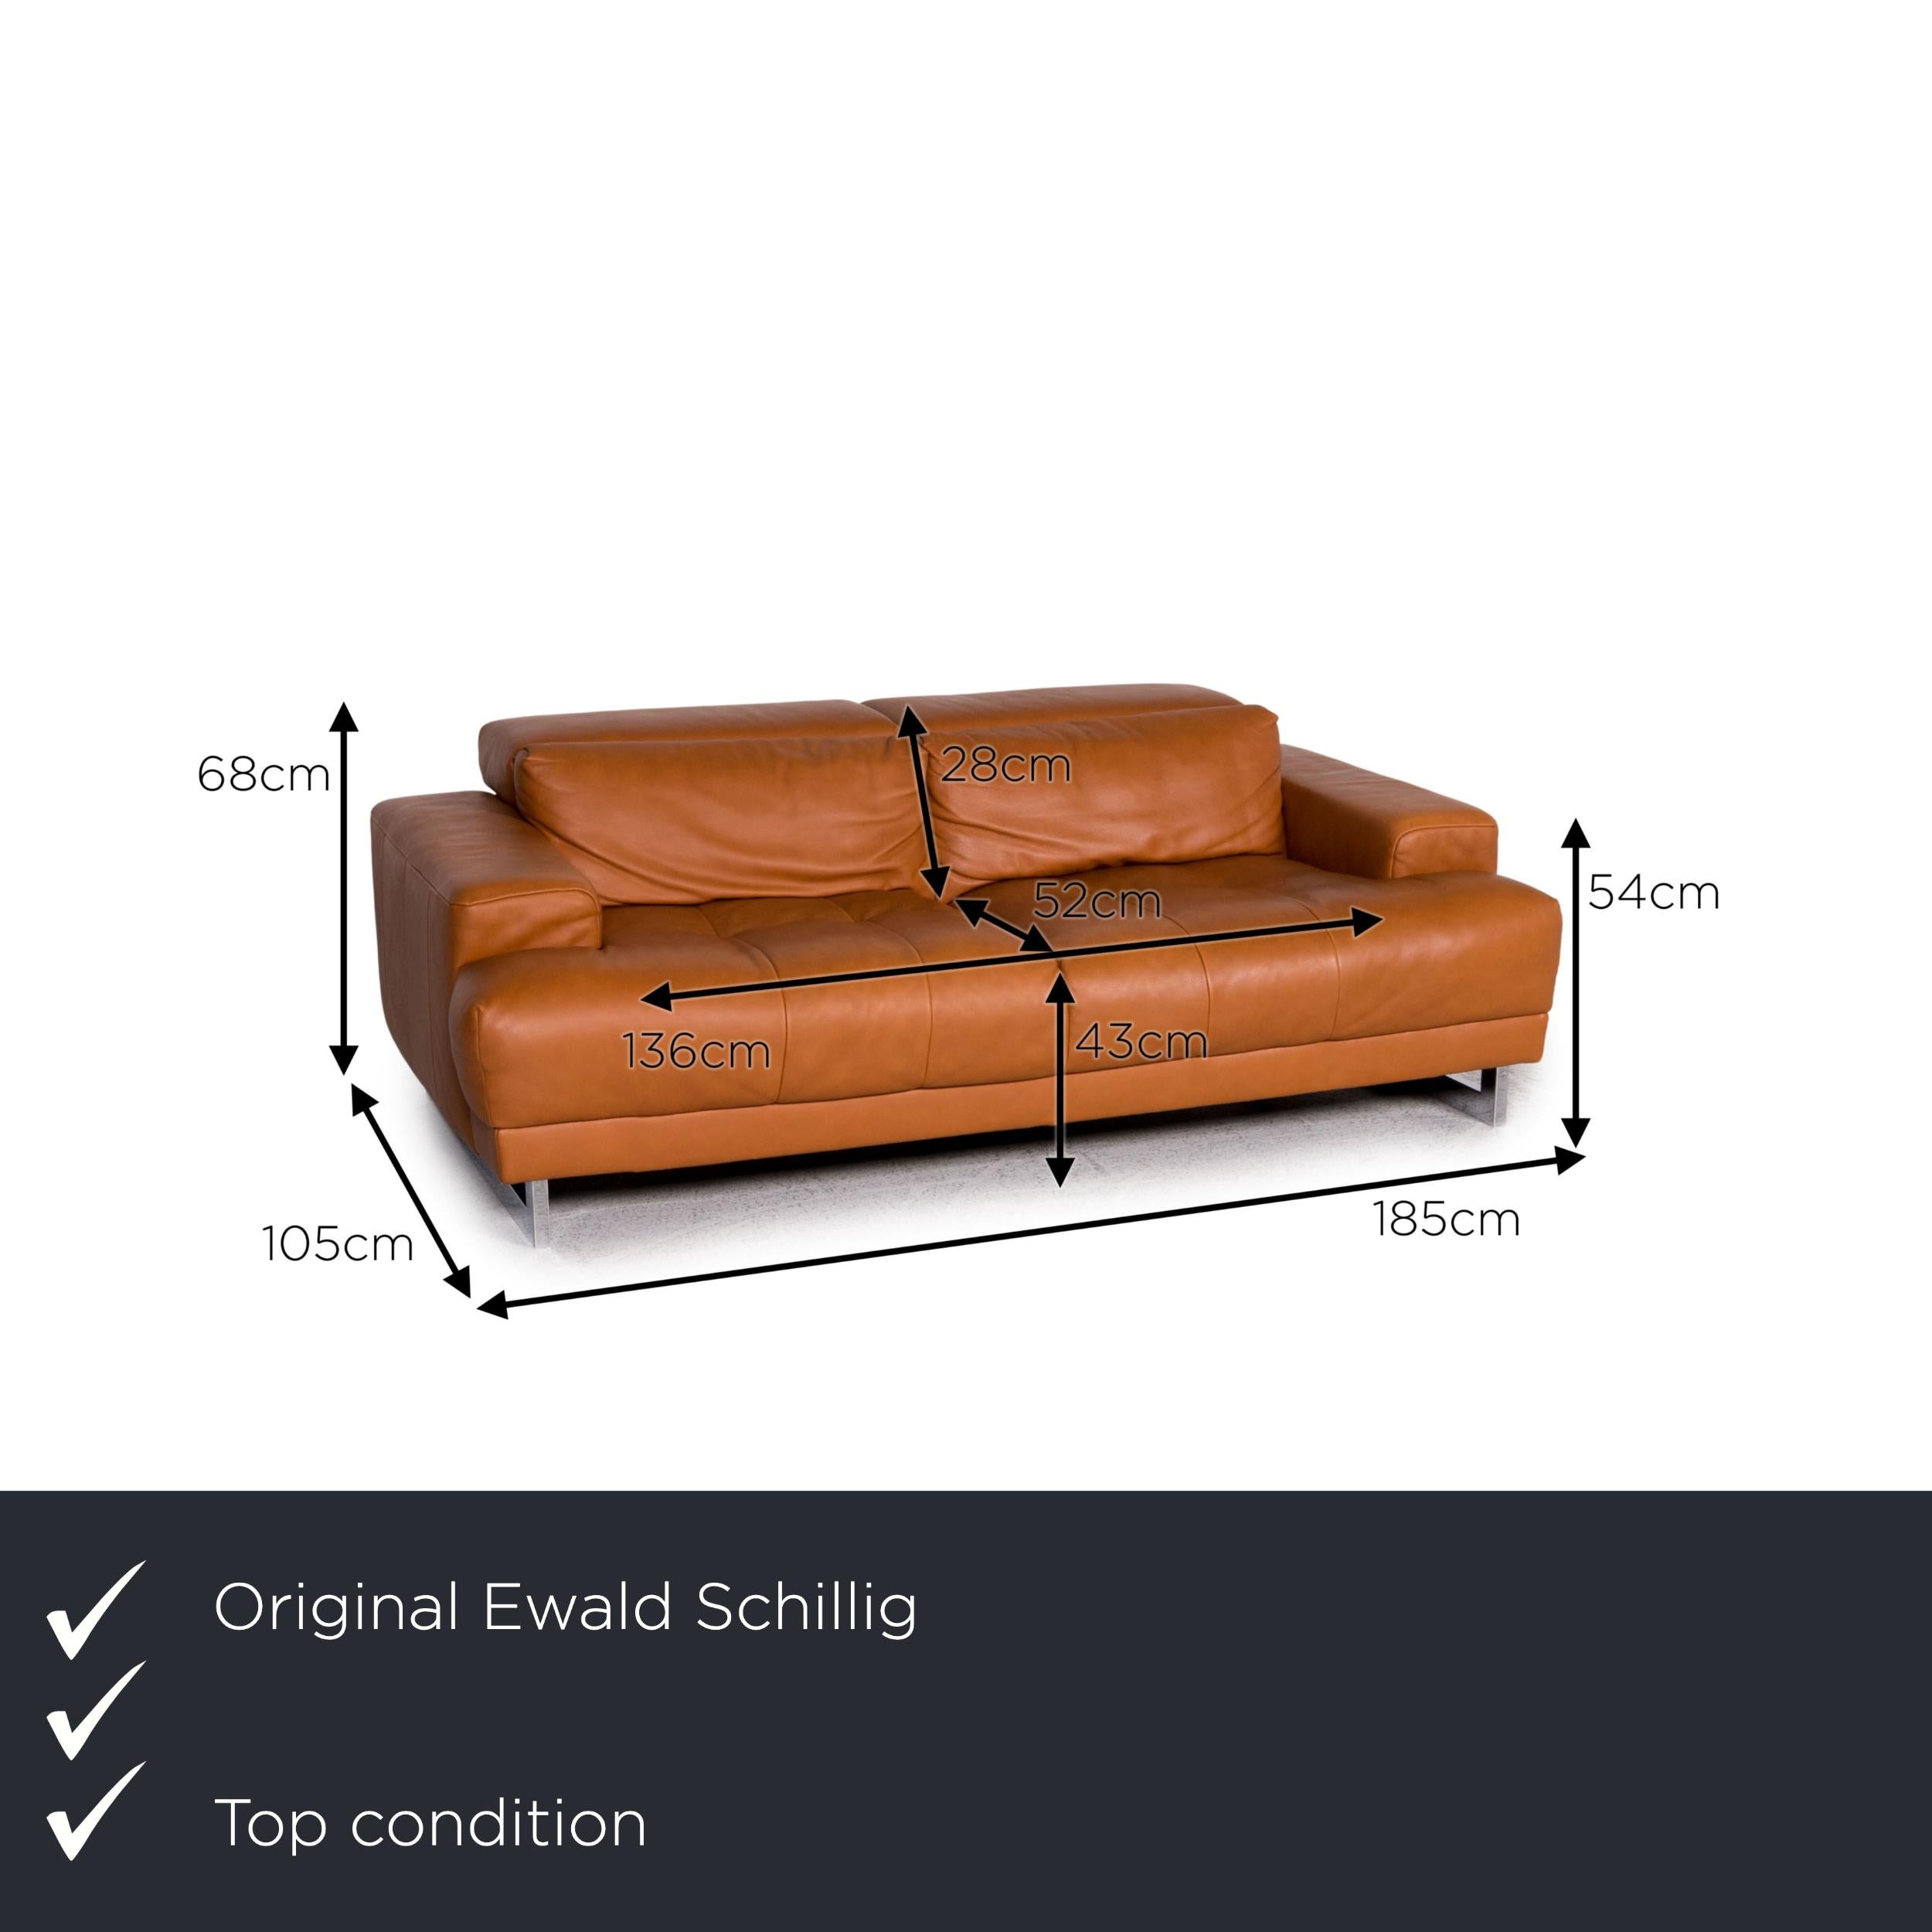 We present to you an Ewald Schillig leather sofa brown cognac three-seater couch.

Product measurements in centimeters:

depth: 105
width: 185
height: 68
seat height: 43
rest height: 54
seat depth: 52
seat width: 136
back height: 28.
 
 